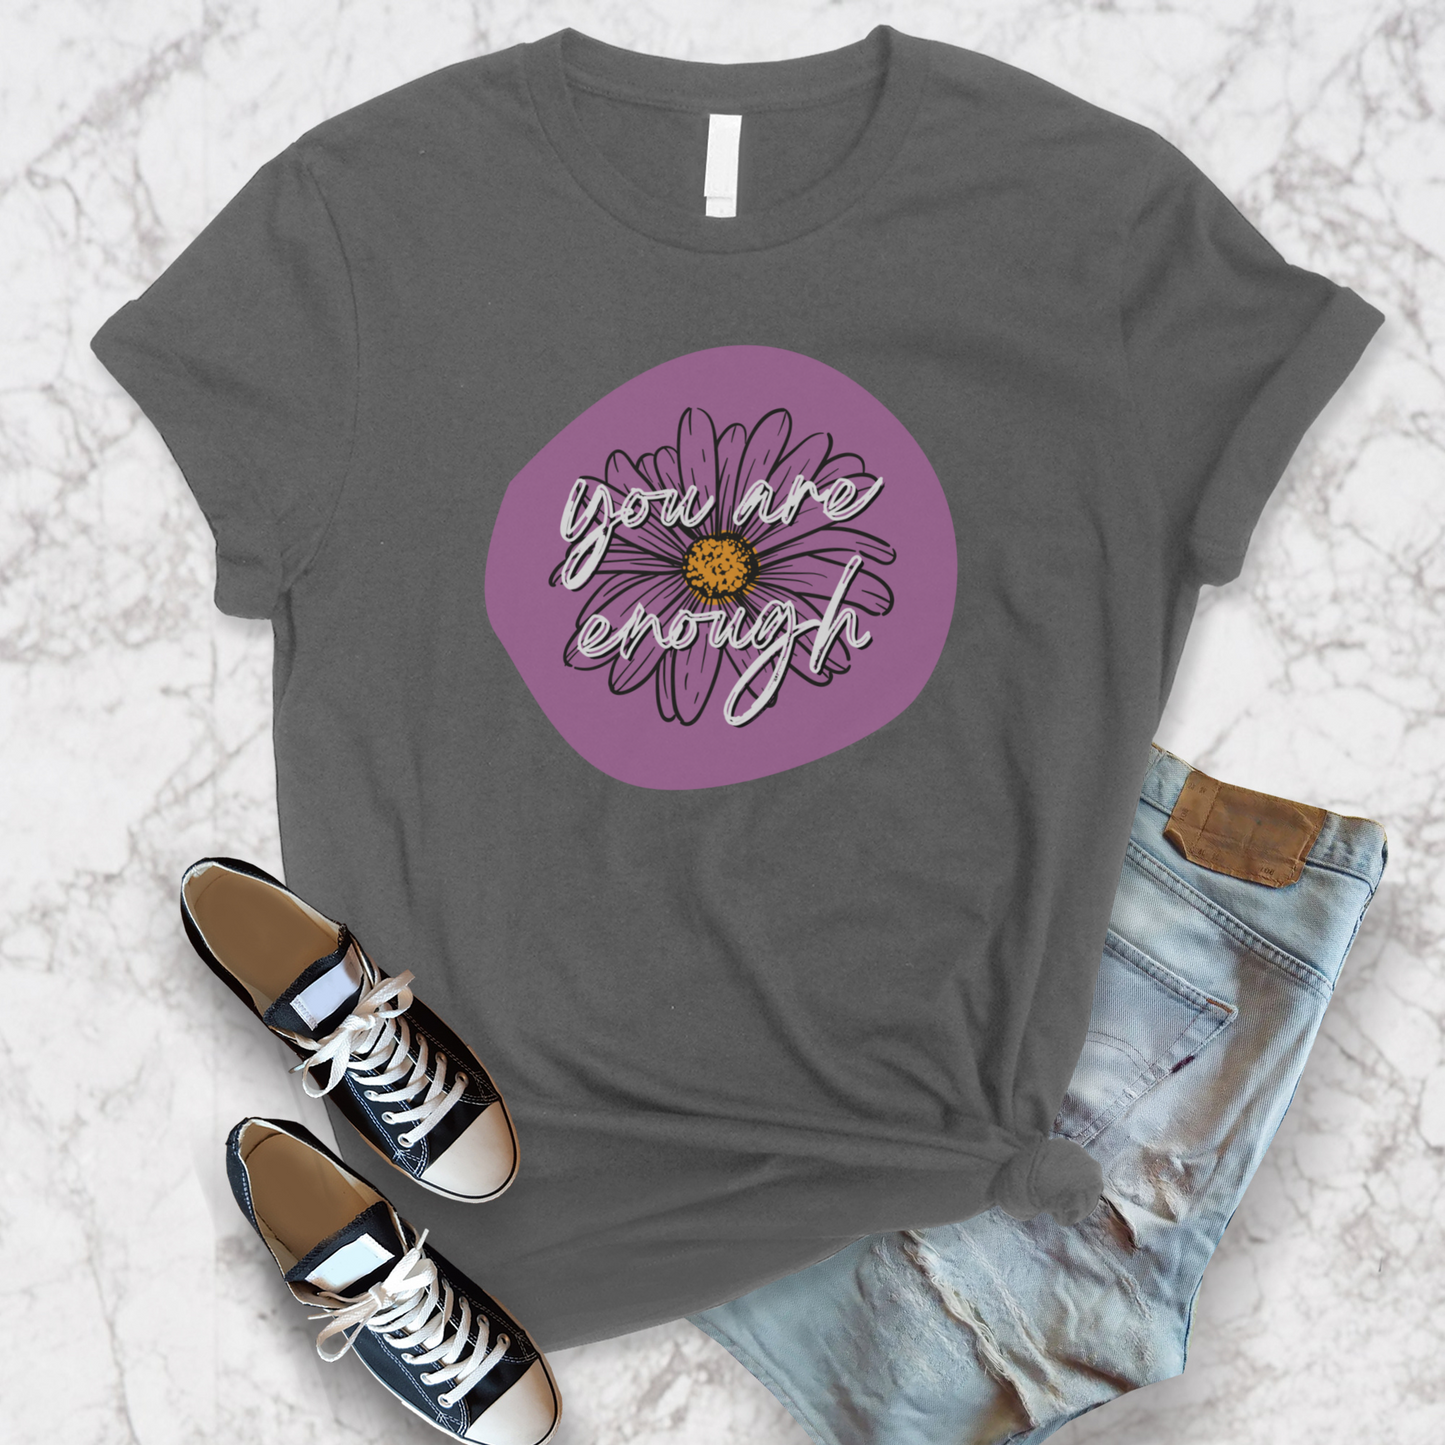 You Are Enough Purple Daisy Floral Positive Message Unisex Jersey Short Sleeve Tee Small-3XL